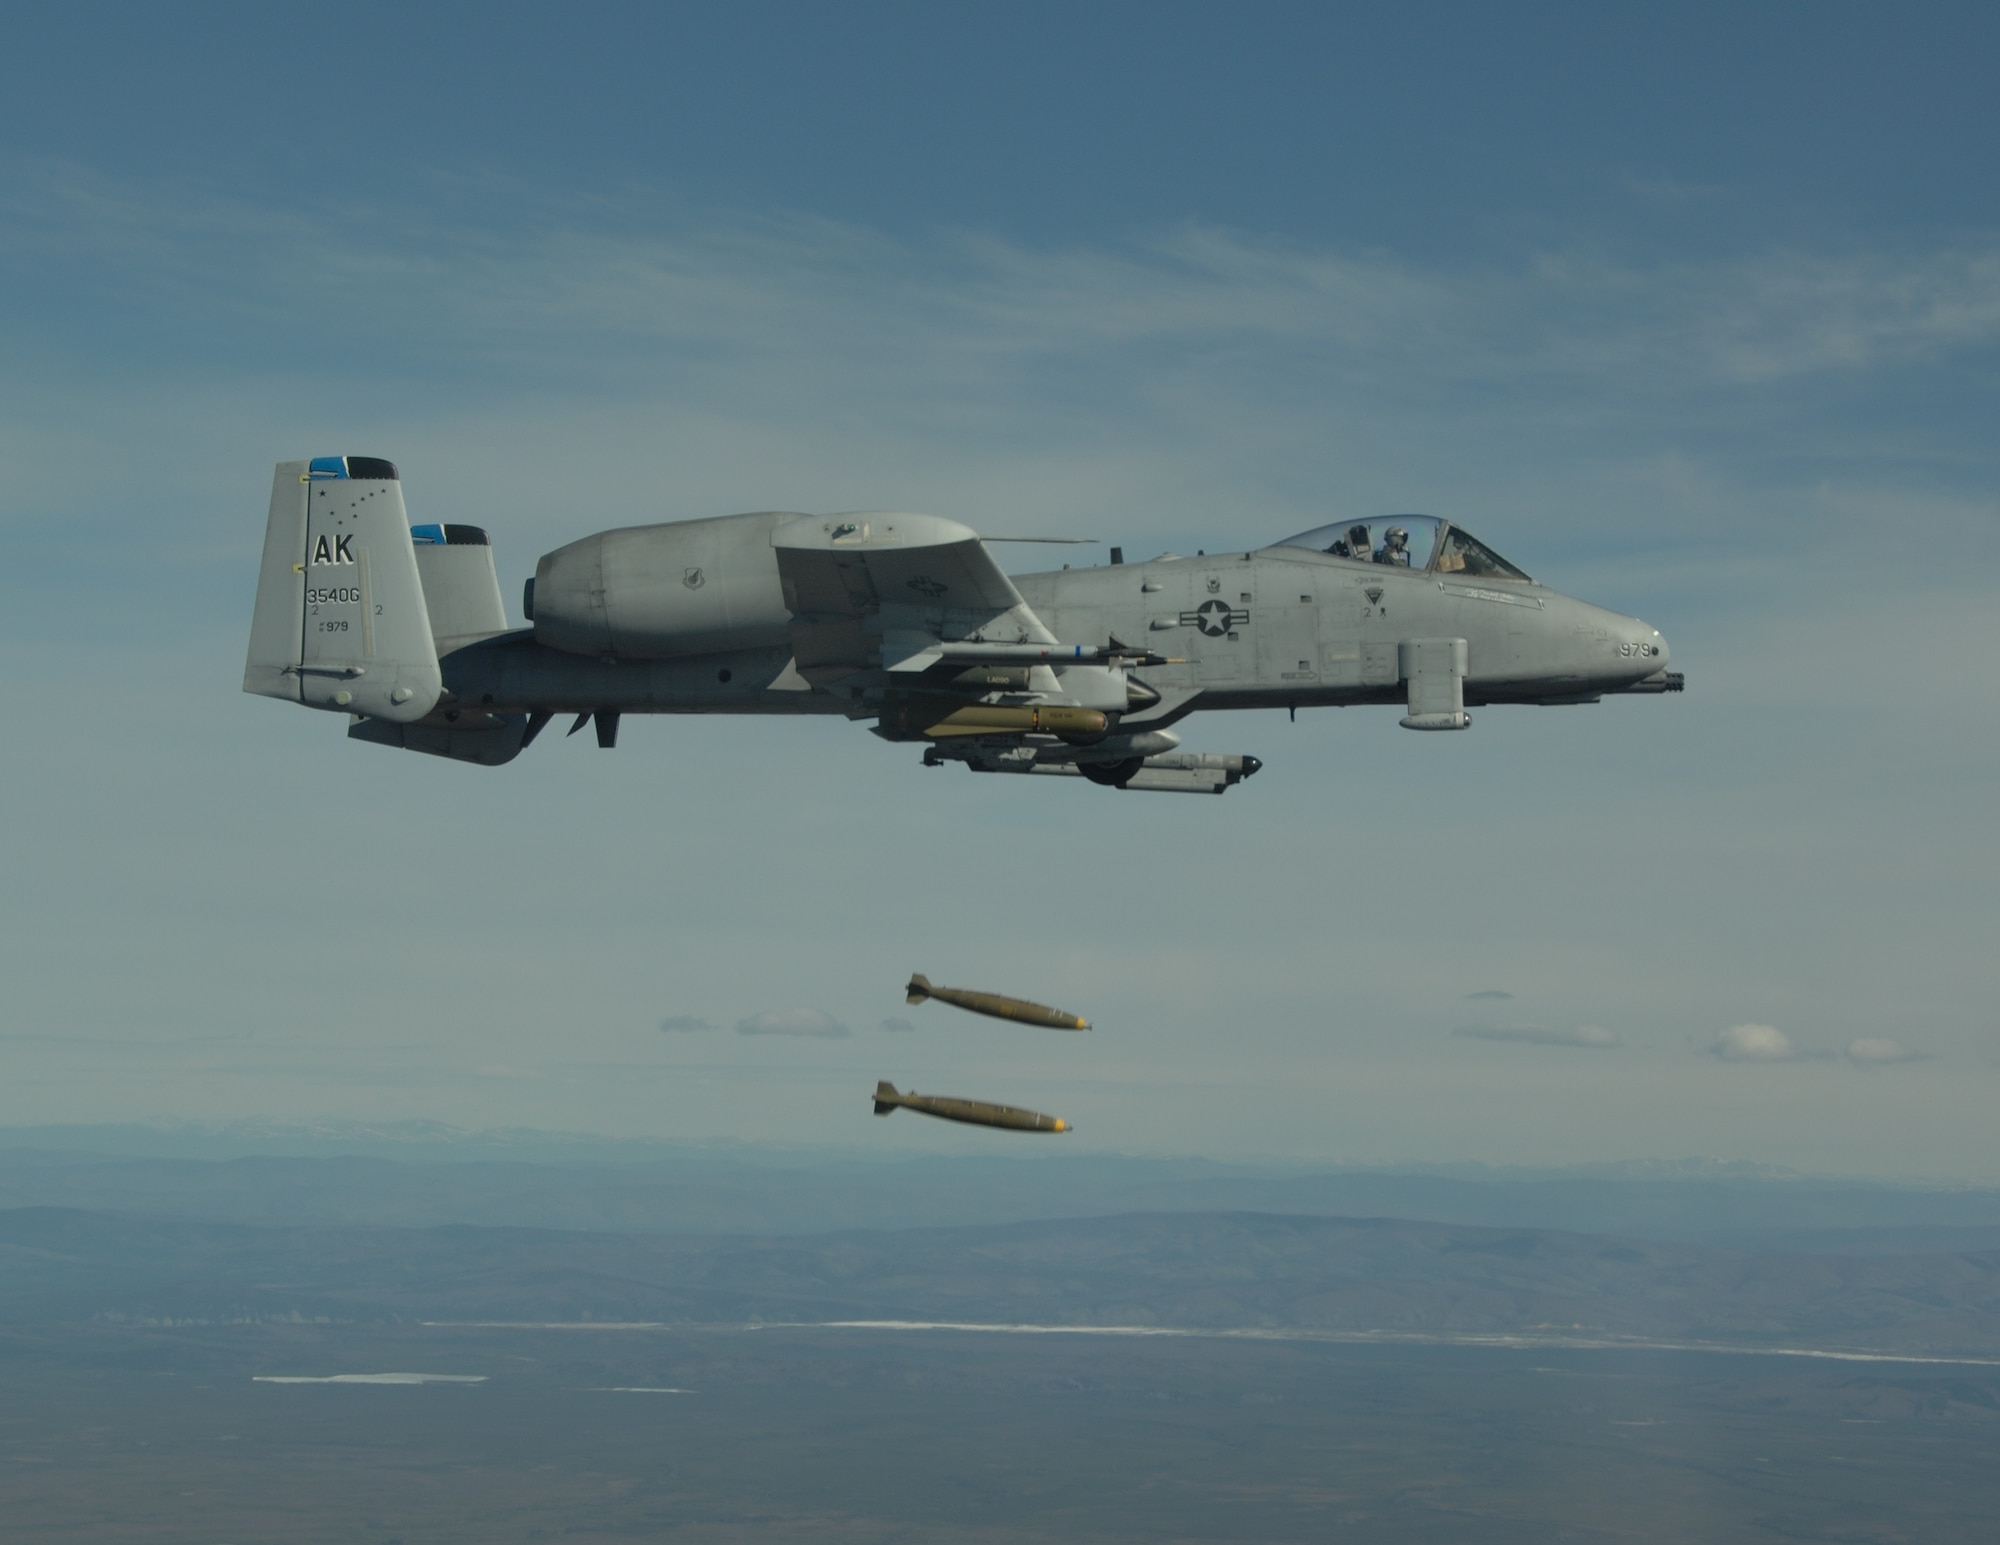 EIELSON AIR FORCE BASE, Alaska--Captain Will Reynolds, A/OA-10 Warthog pilot from the 355th Fighter Squadron, drops Mk-82 bombs over the Pacific Alaska Range Complex during live fire training.The 355th Fighter Squadron is tasked to provide mission ready A/OA-10s as well as search and rescue capability, in Alaska and deployed sites worldwide. (U.S. Air Force photo by Master Sgt. Robert Wieland) 